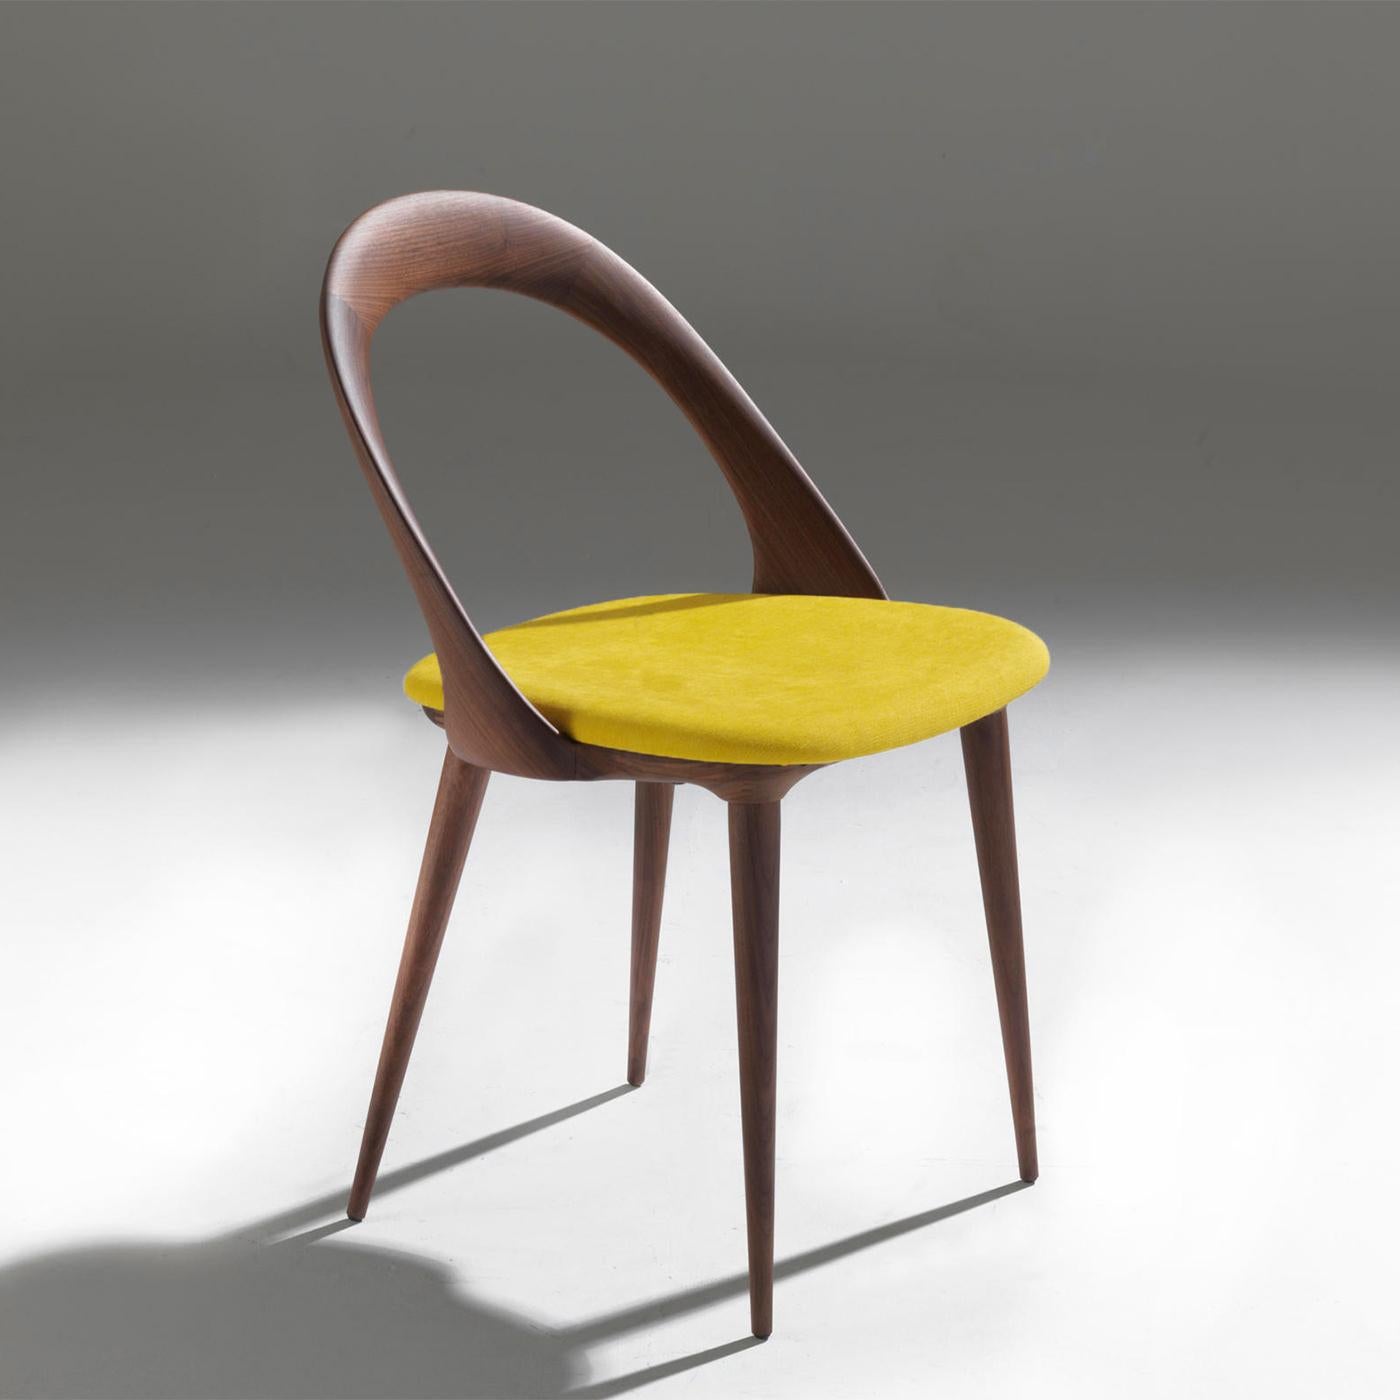 Chair Ark Walnut with structure in solid walnut wood,
seat upholstered and covered with high quallity velvet 
fabric (Cat. C) in yellow color.
Also available with other fabrics, on request.